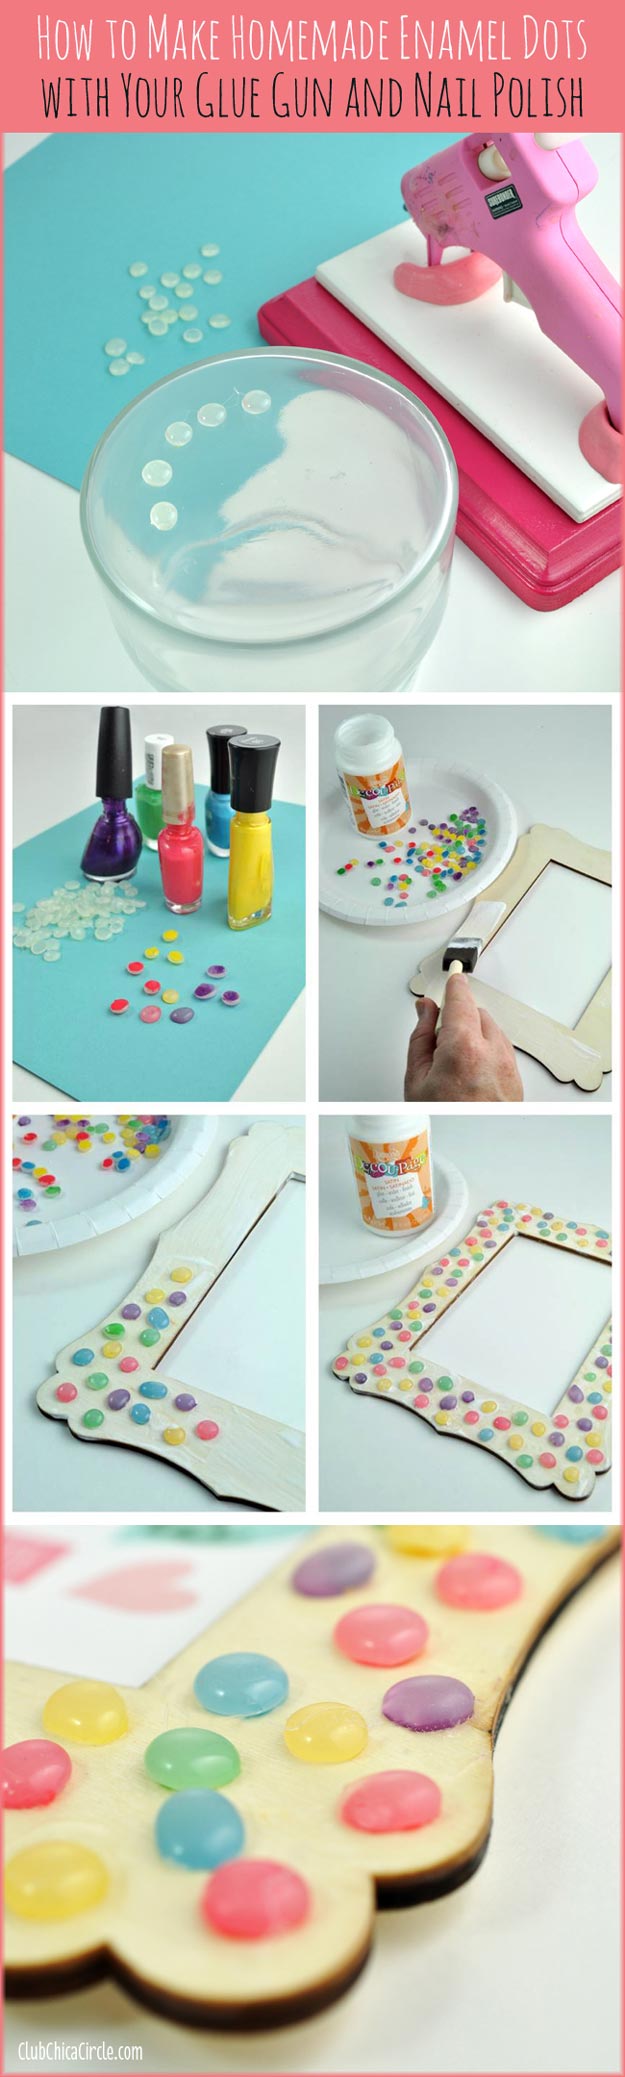 DIY Crafts Using Nail Polish - Fun, Cool, Easy and Cheap Craft Ideas for Girls, Teens, Tweens and Adults | Homemade Enamel Dots With Glue Gun